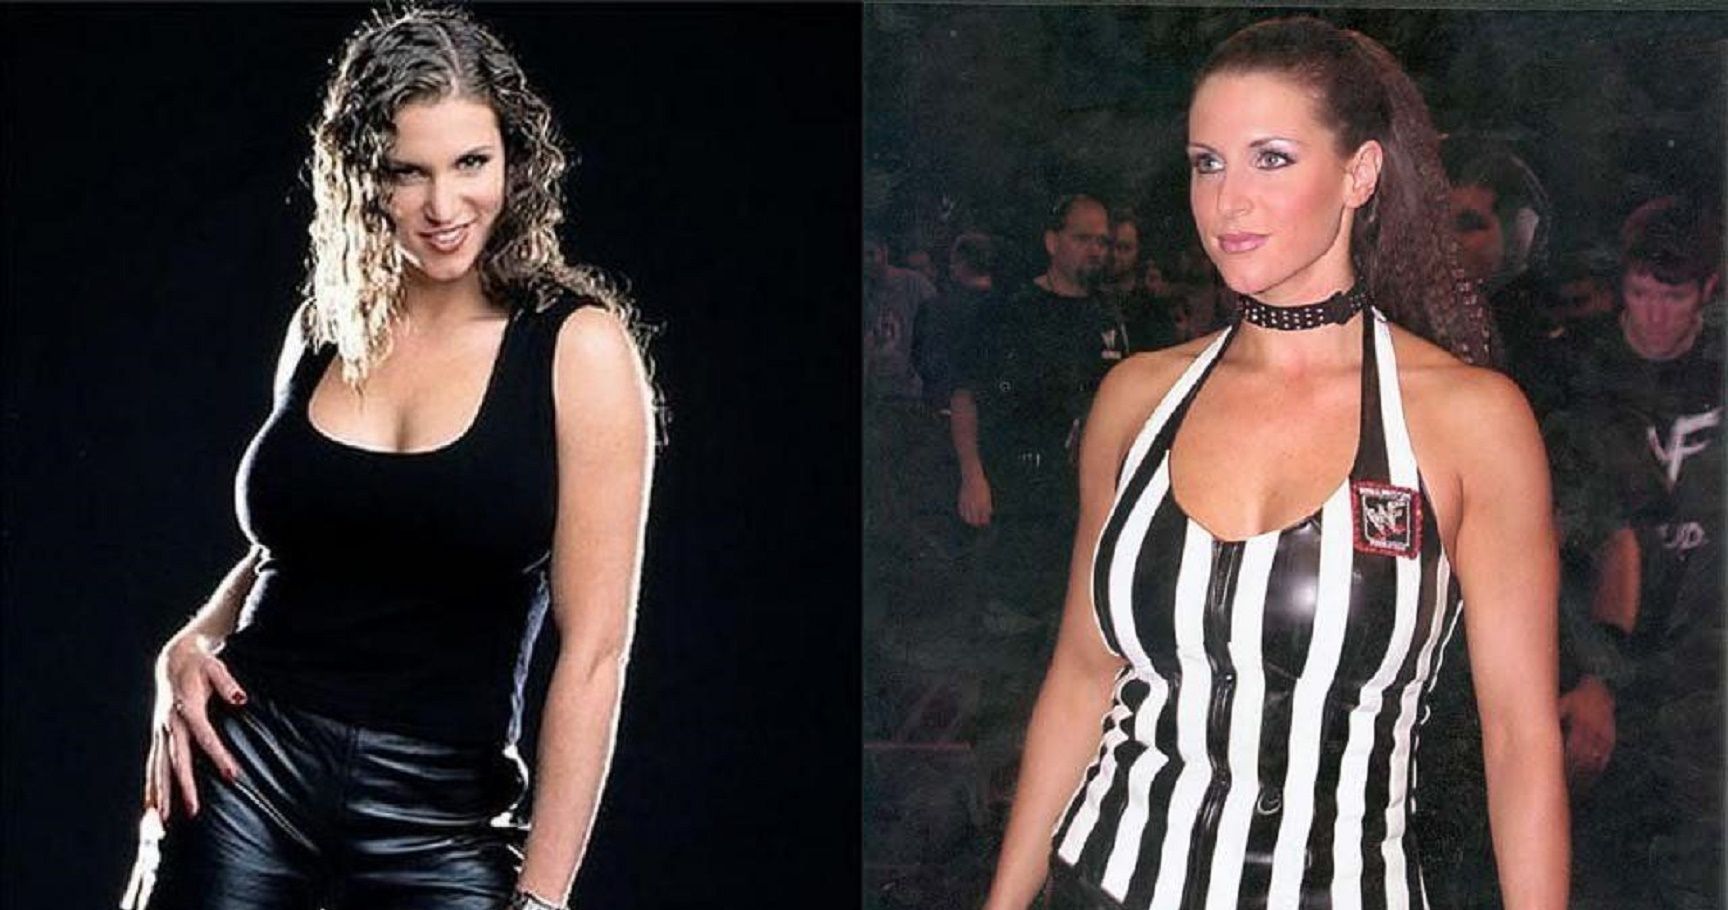 Stephanie Mcmahon X Videos - Top 20 Hot Pictures of Stephanie McMahon You NEED to See